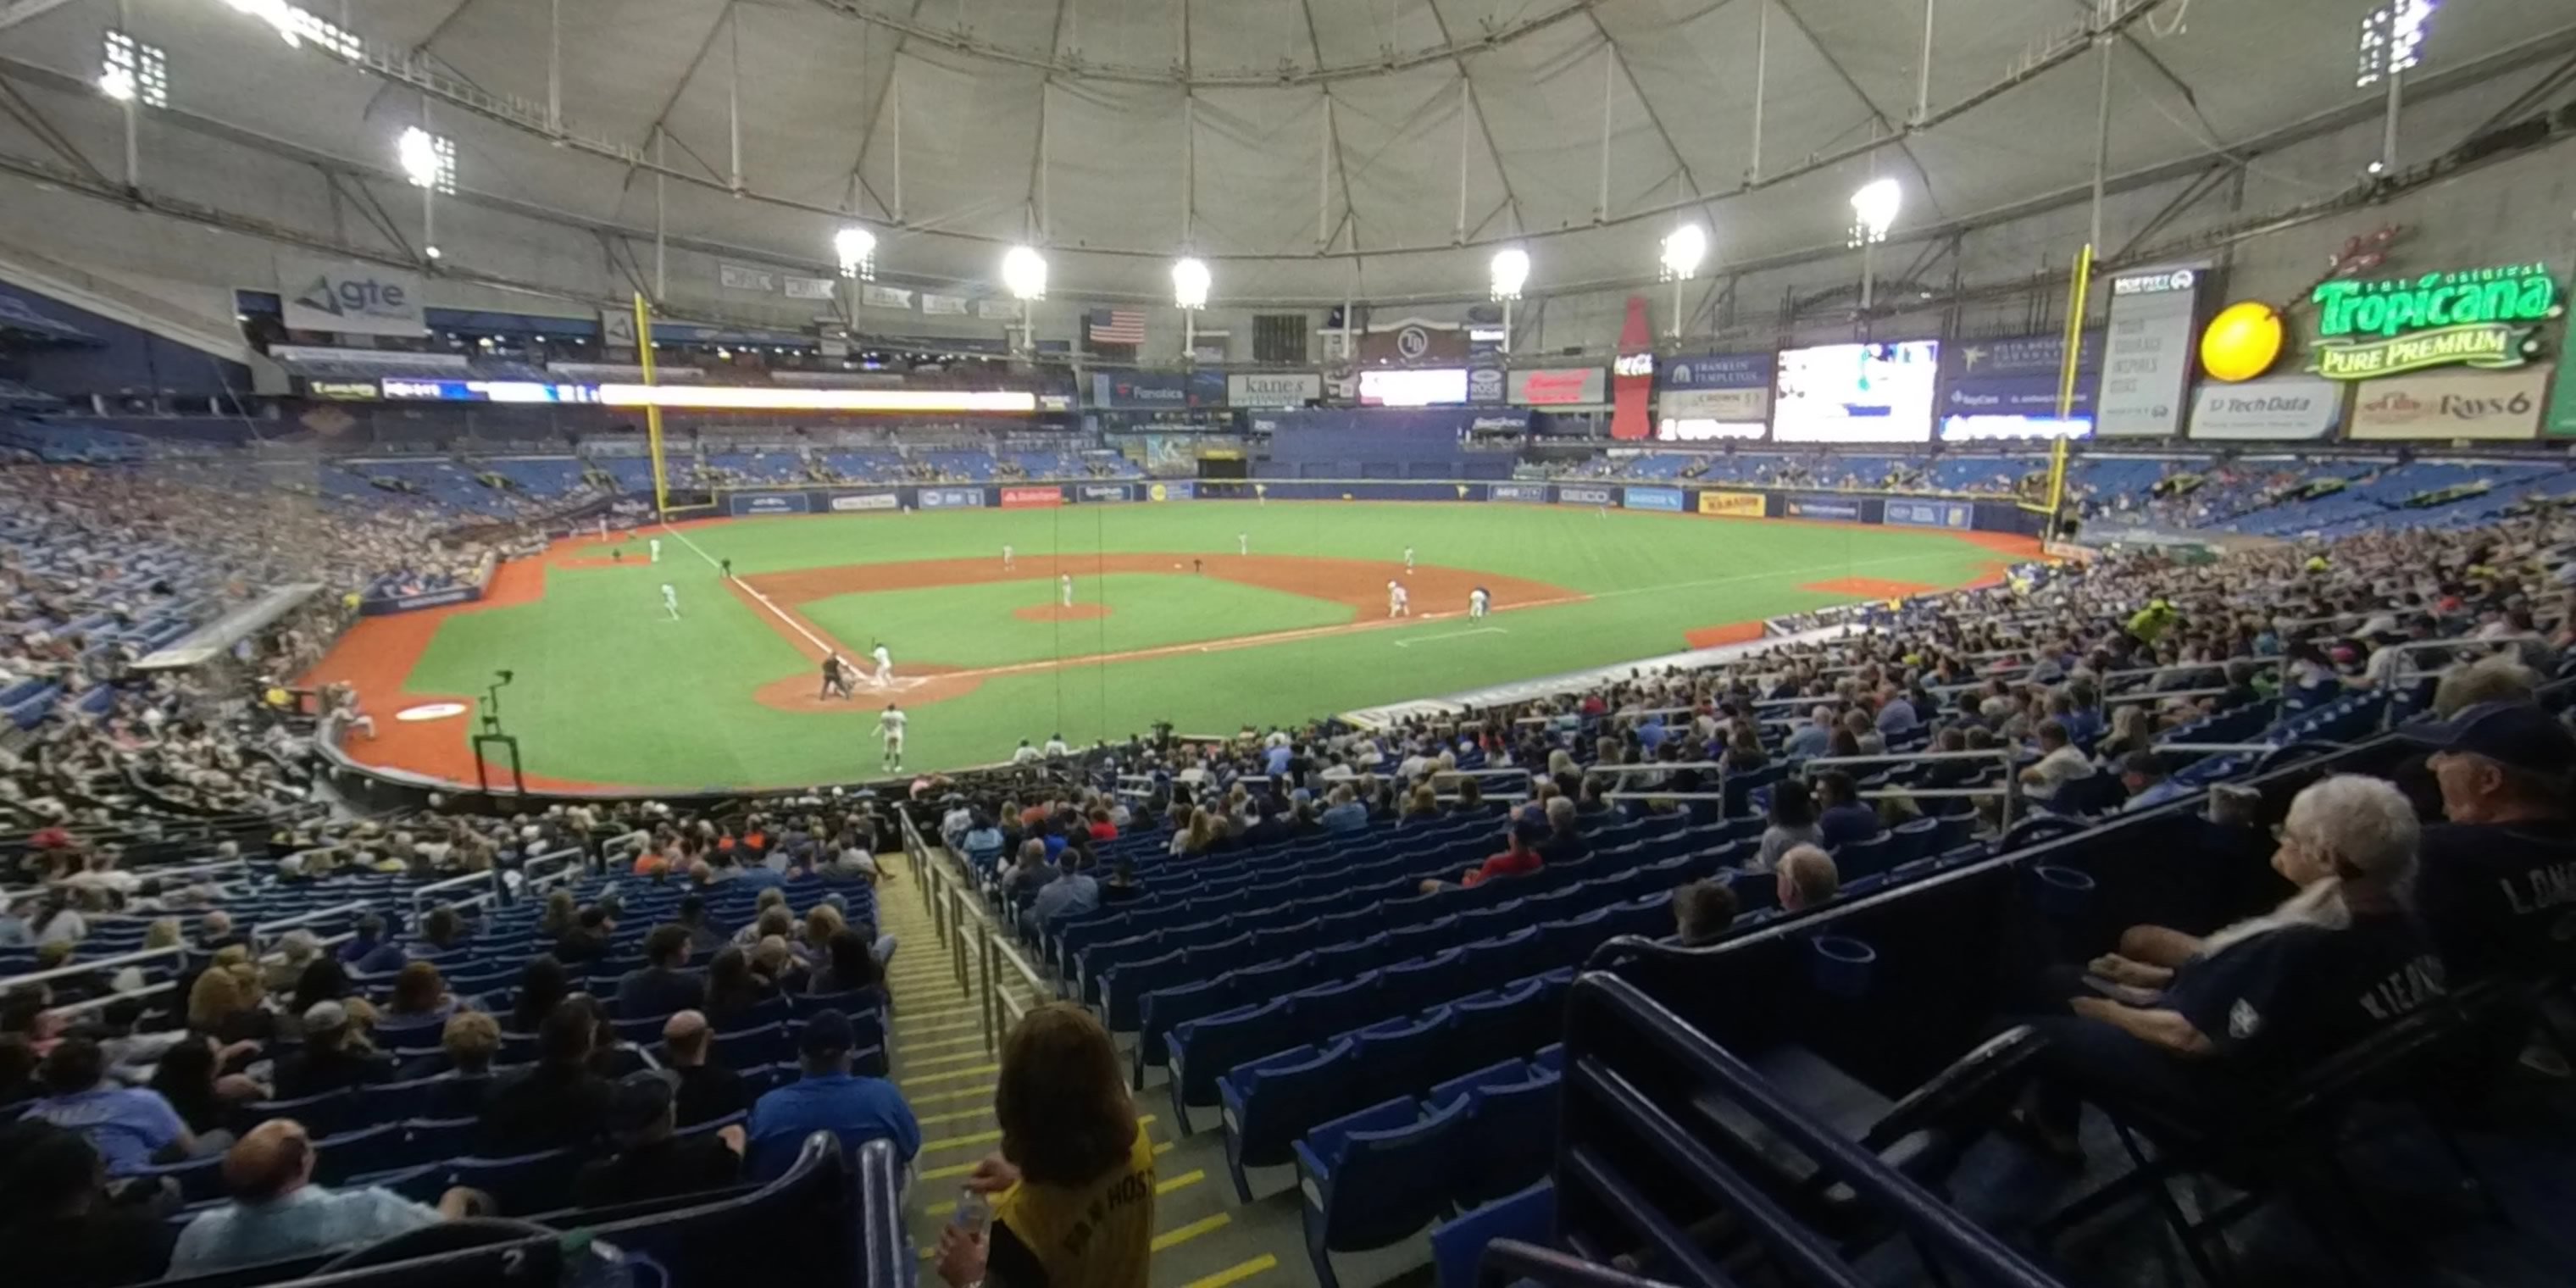 section 108 panoramic seat view  for baseball - tropicana field